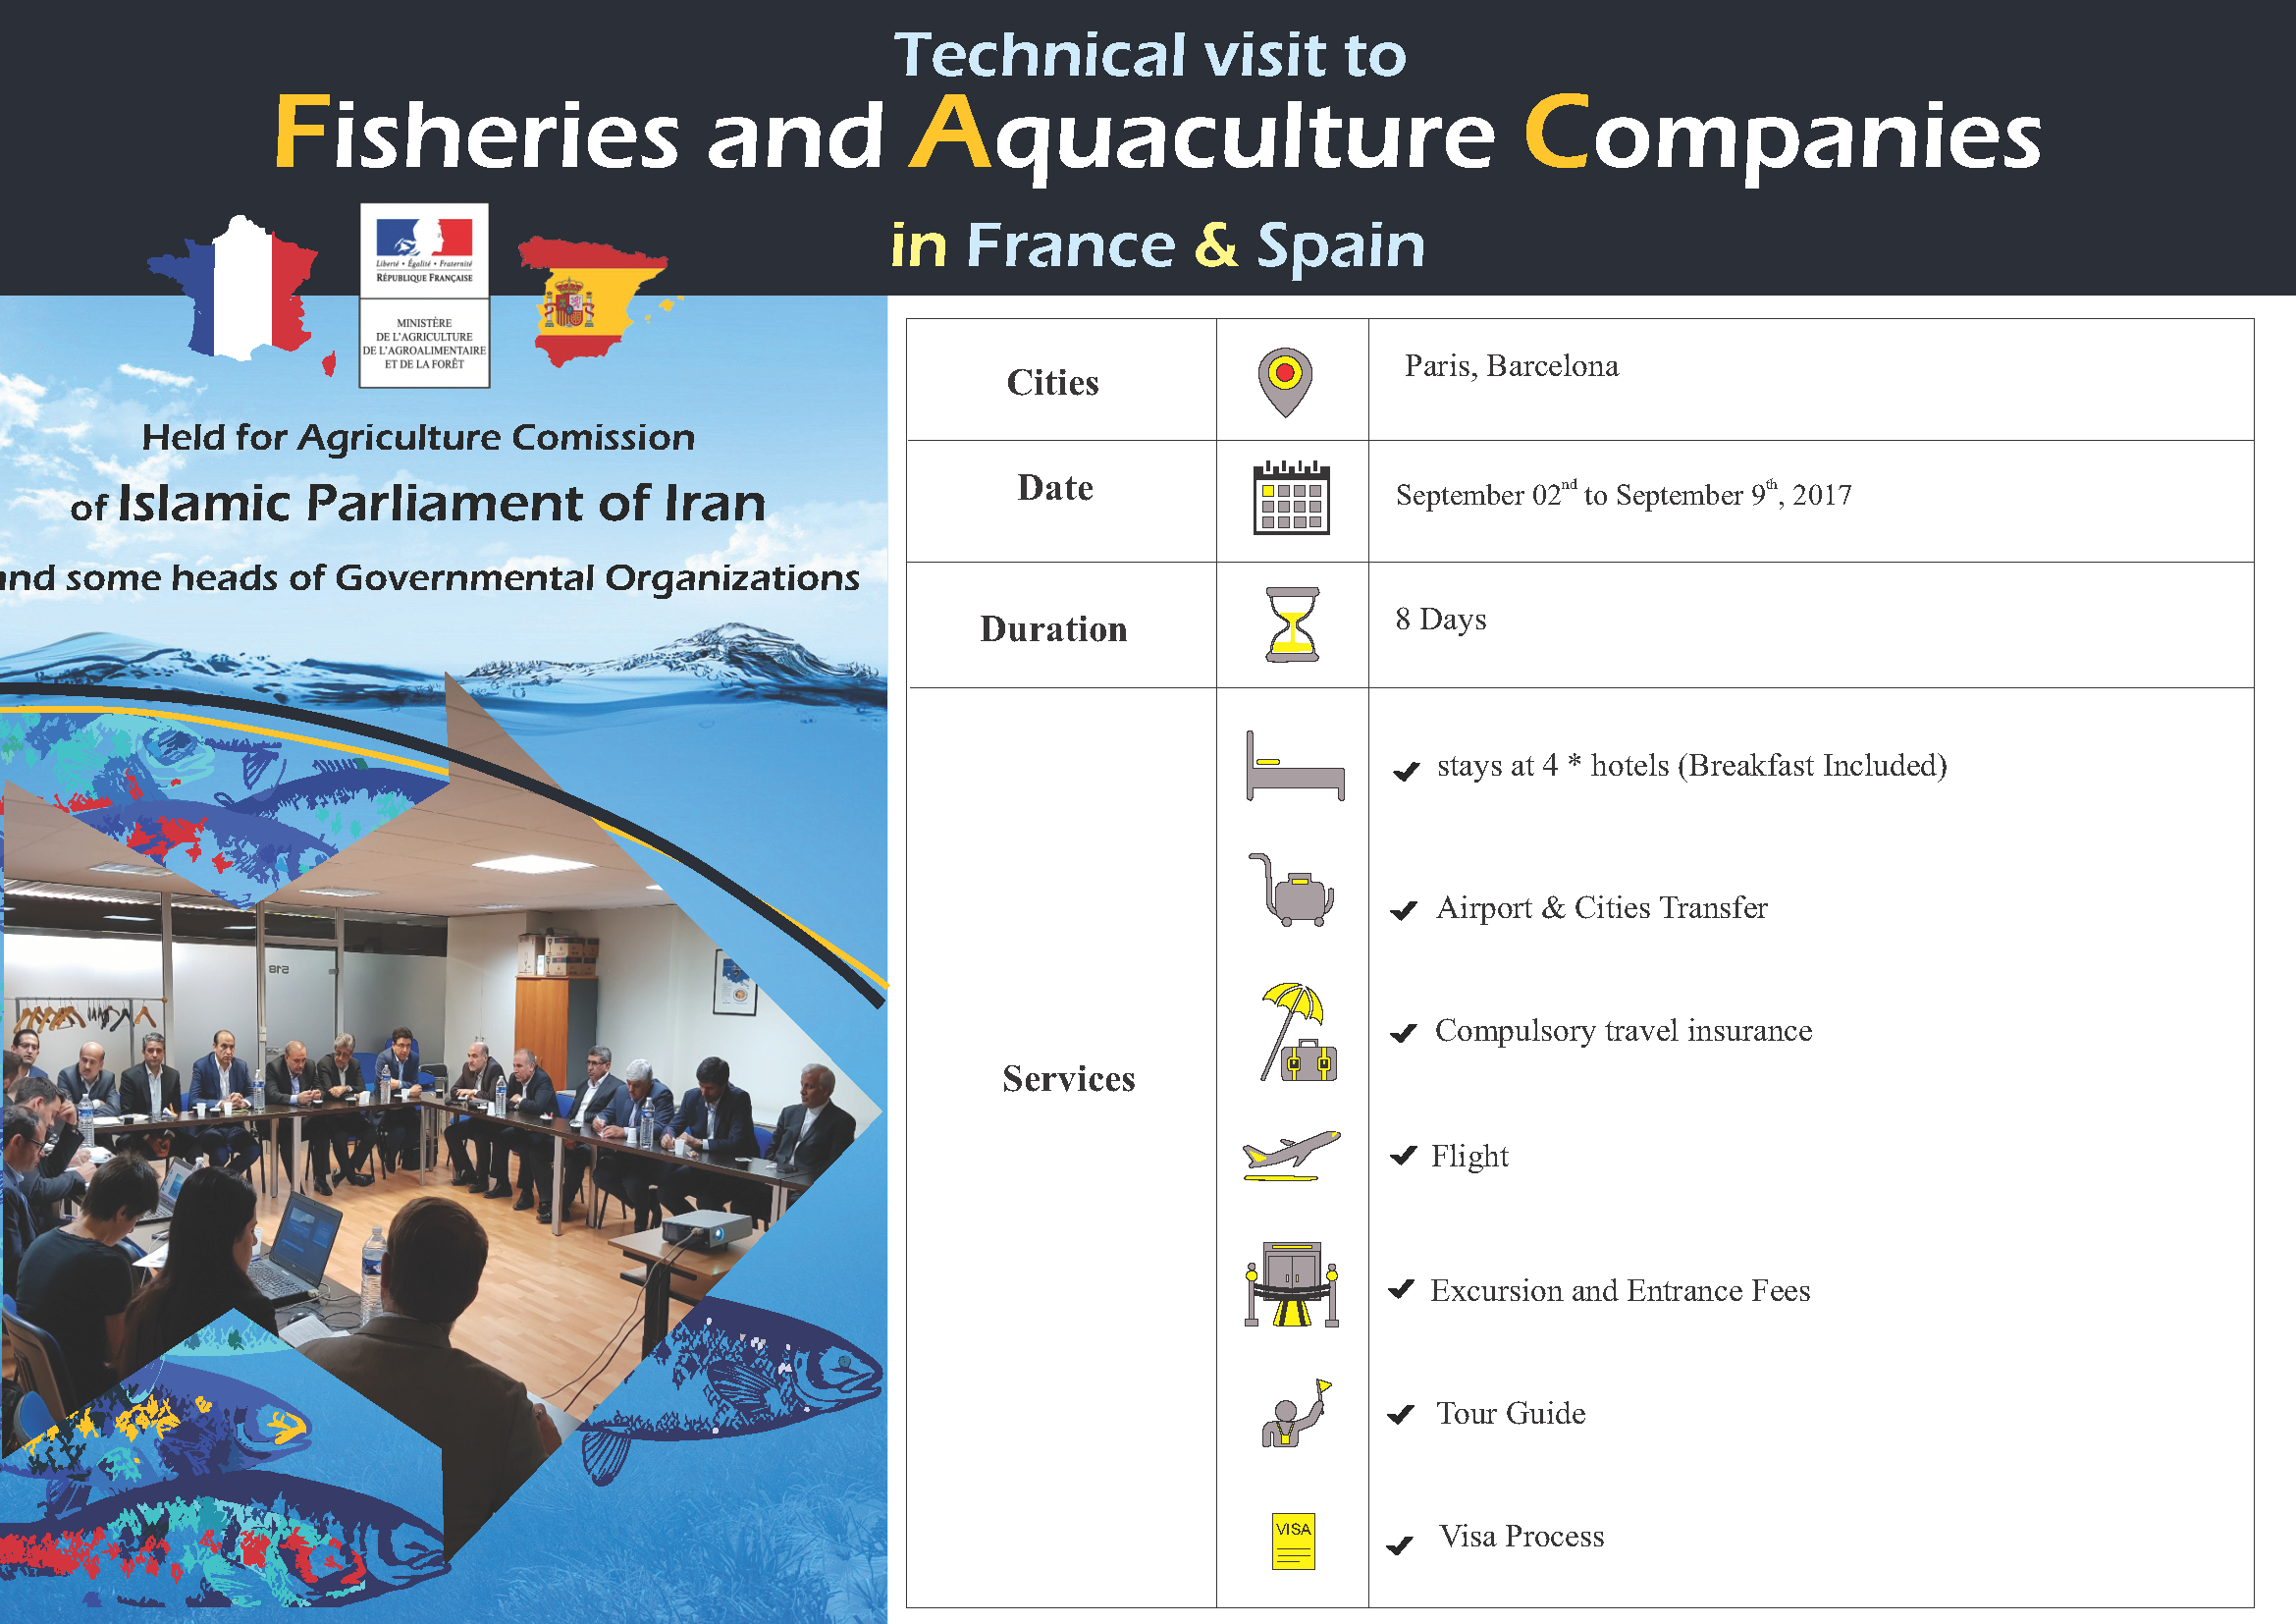 Technical Tour of Fisheries and Aquaculture Companies, Sep. 2017